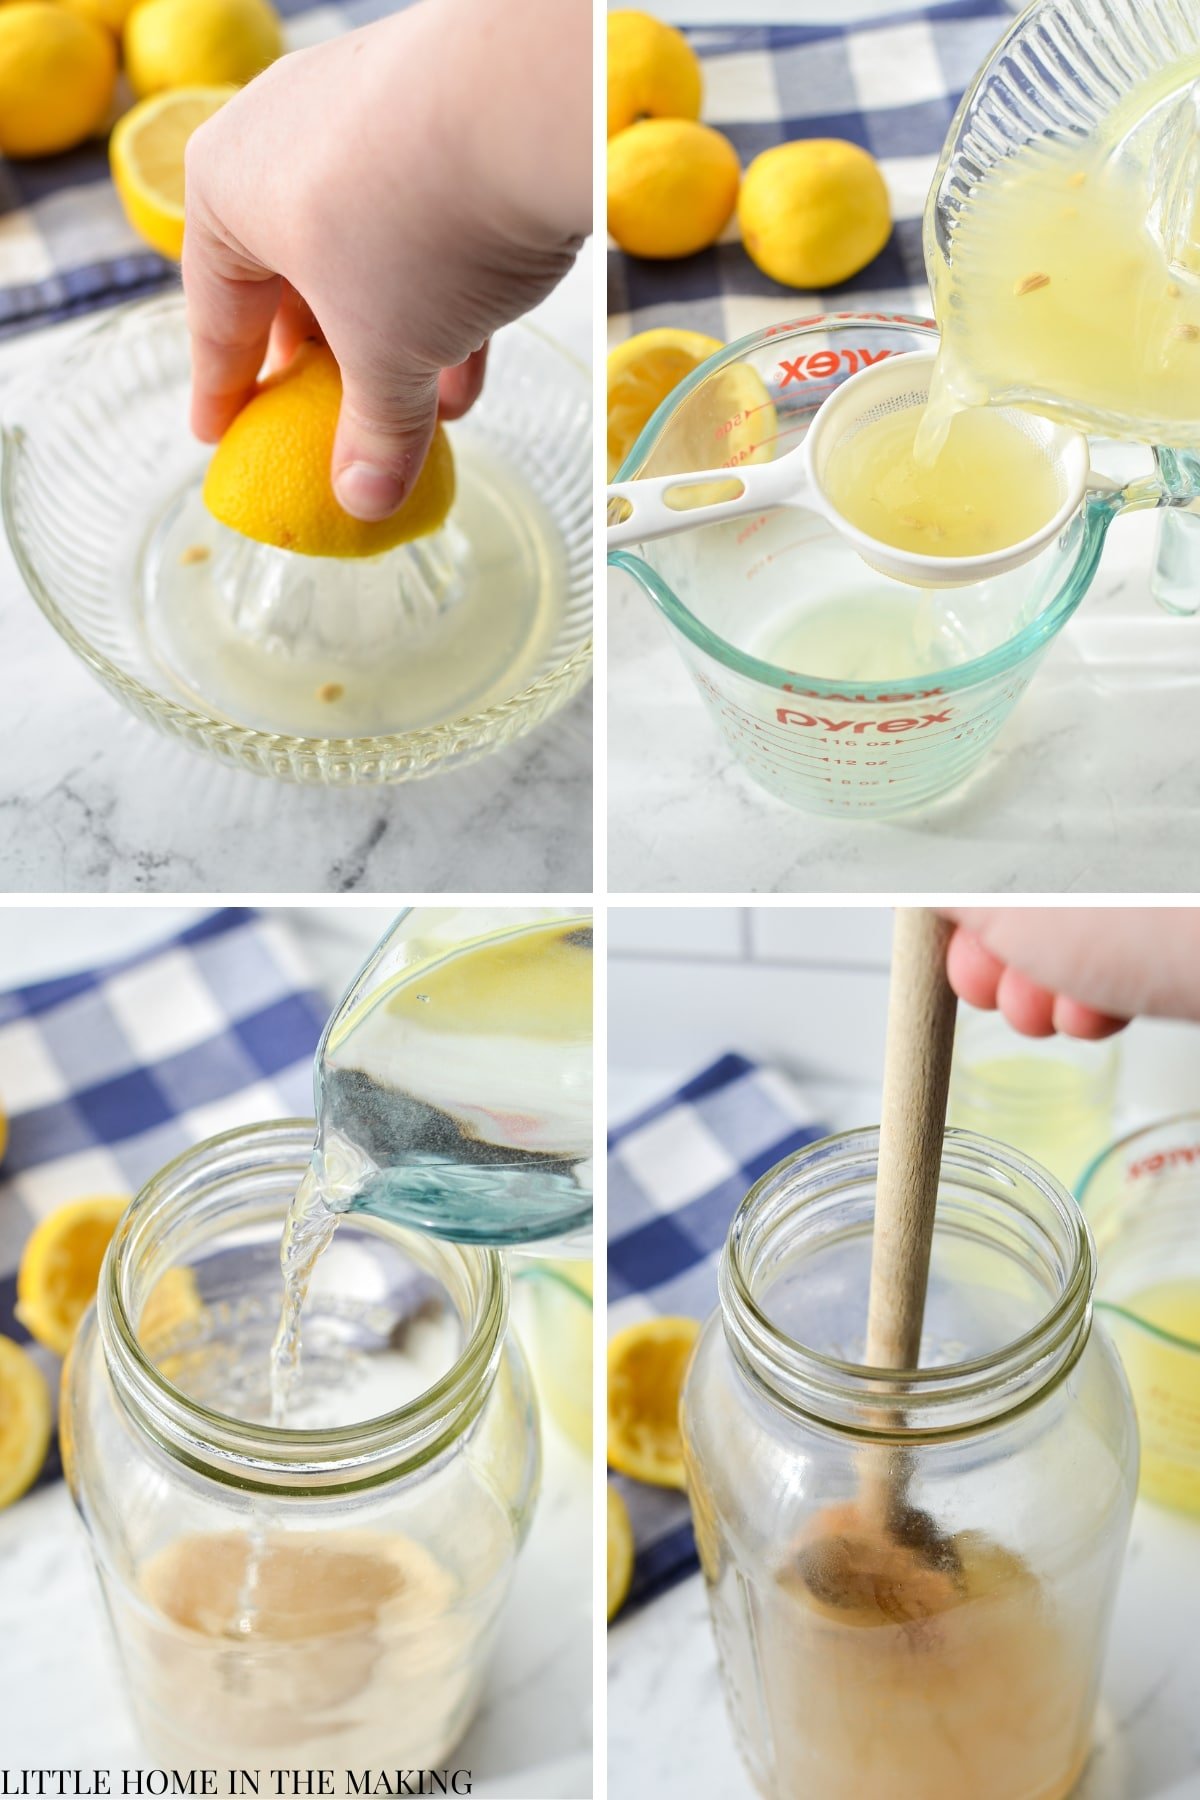 Squeezing lemons to get the juice, and then stirring sugar and hot water together.